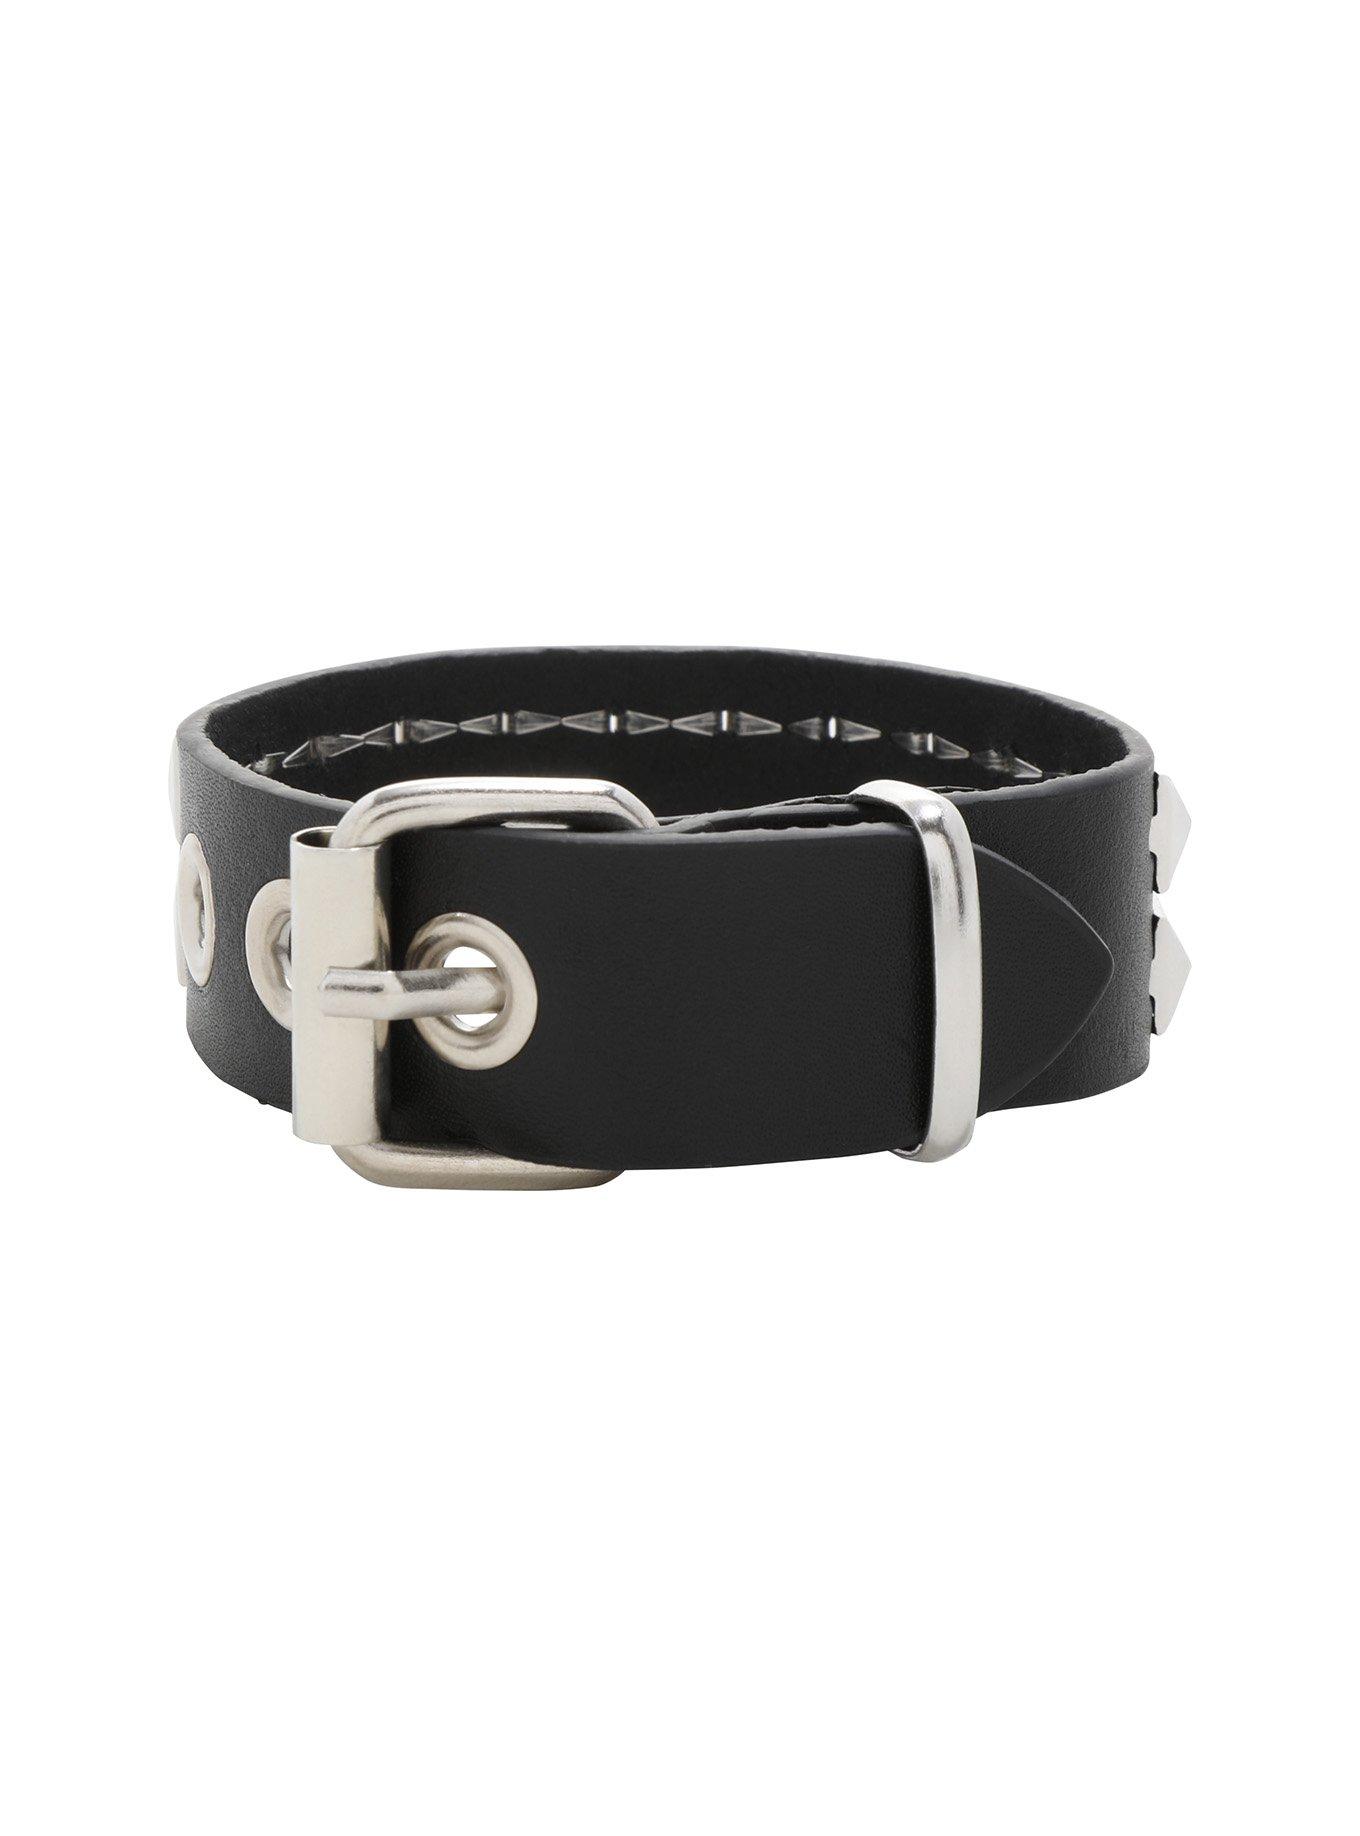 Double Pyramid Stud Buckle Cuff | Hot Topic